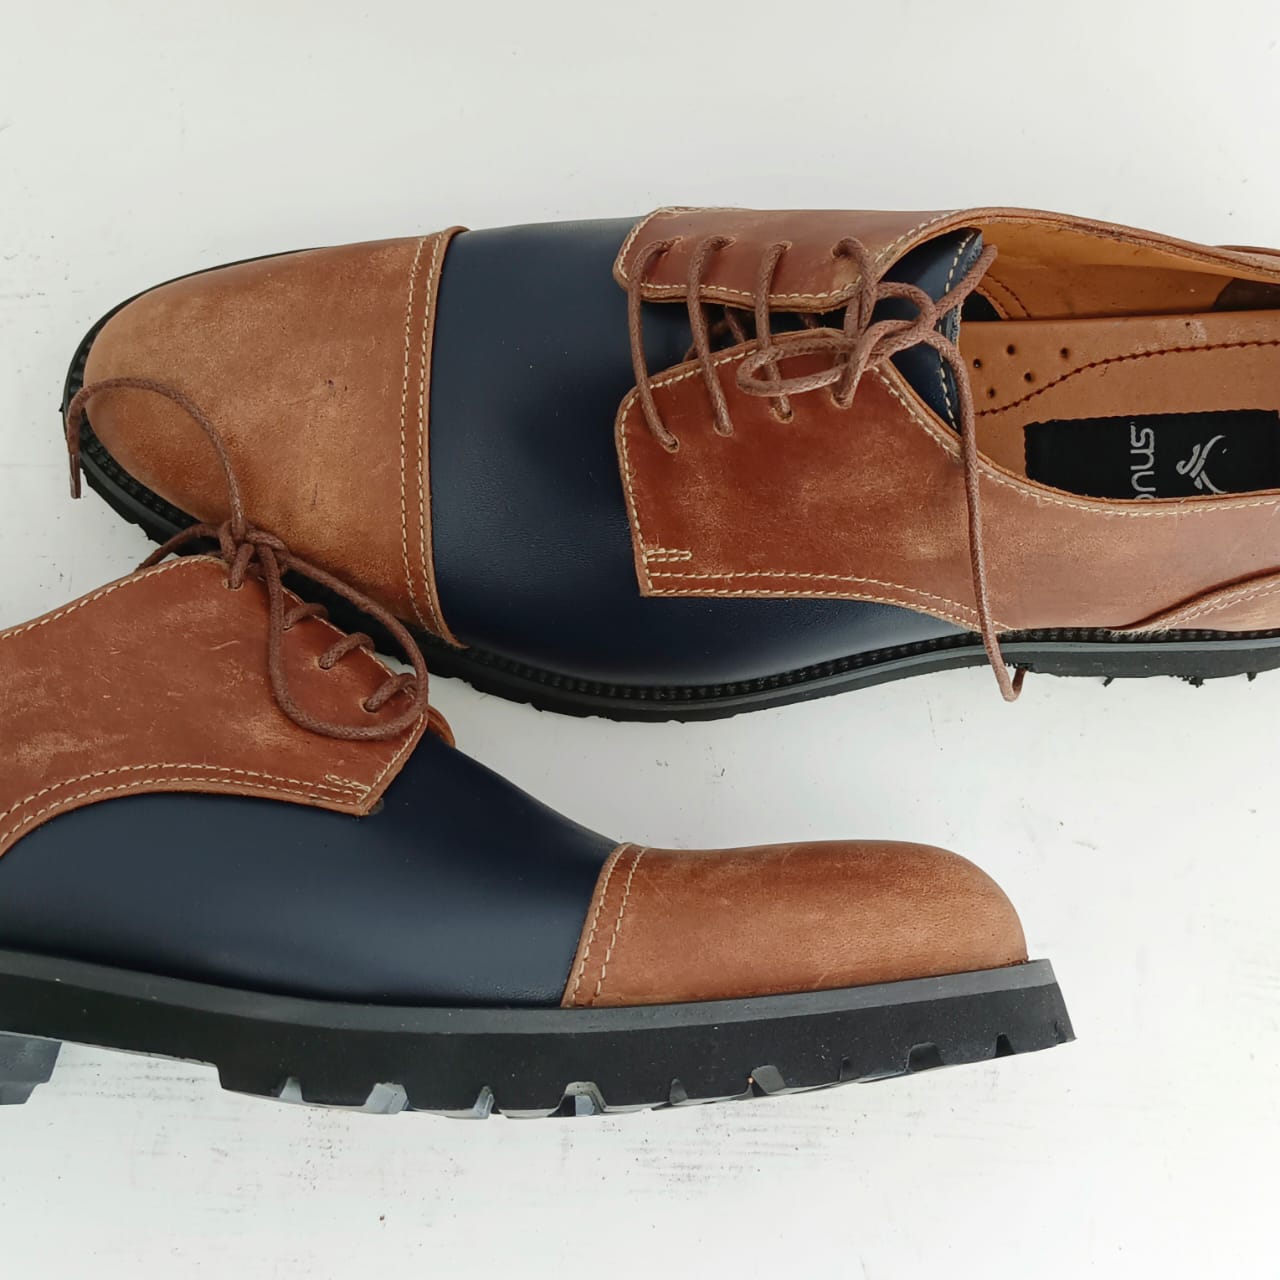 Crazy Horse Leather Shoes by Snug.